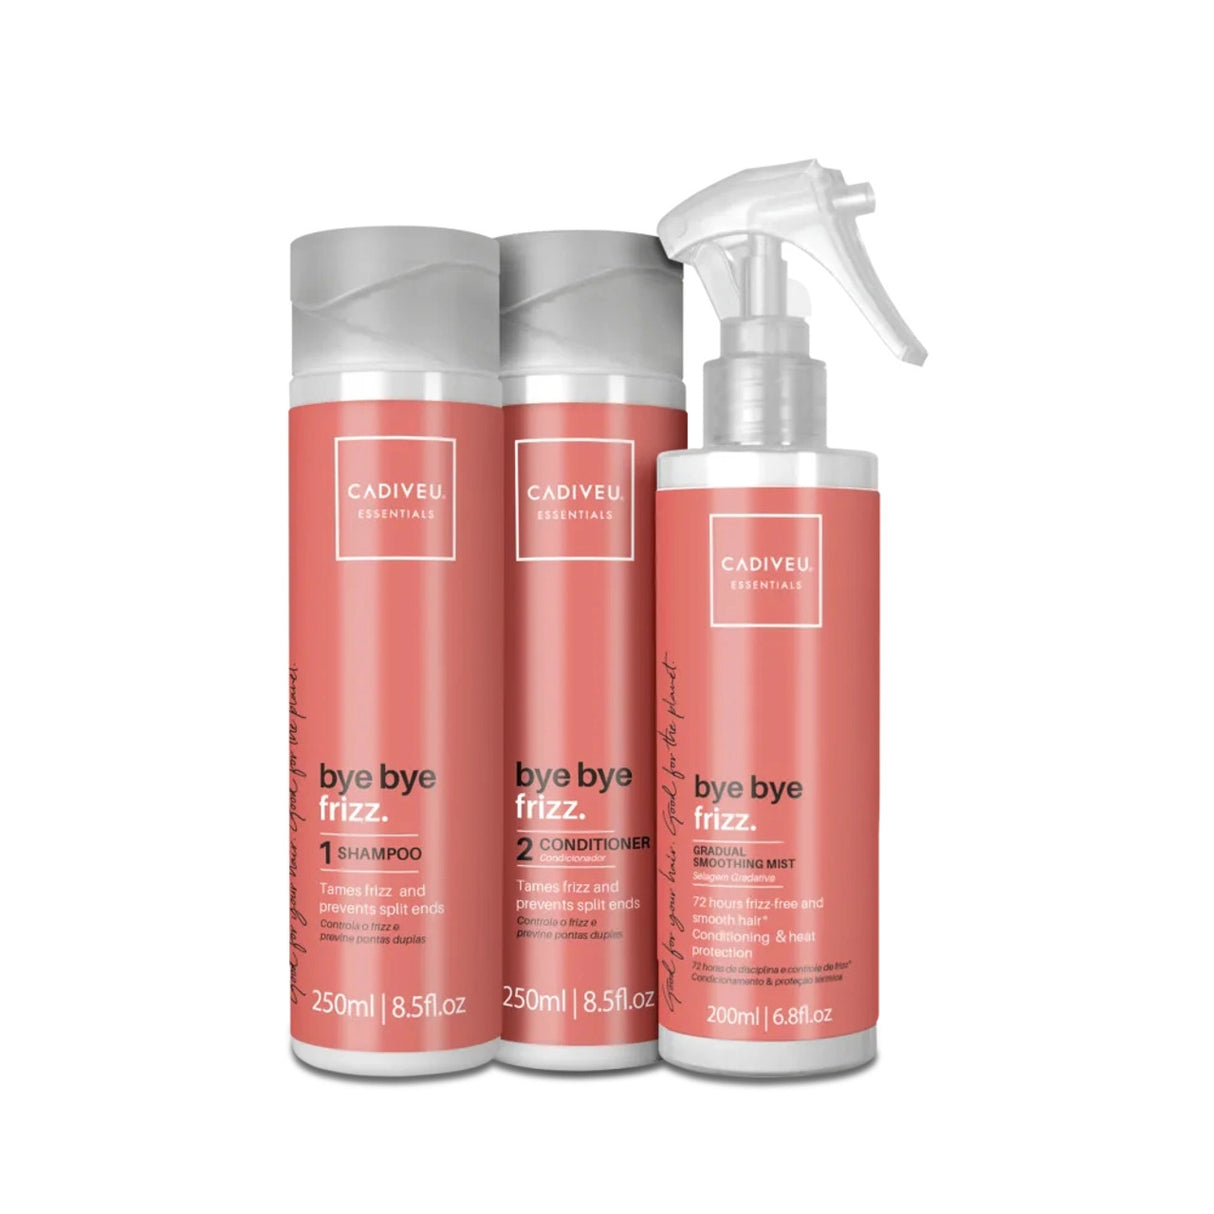 KIT CADIVEU PROFESSIONAL ESSENTIALS BYE BYE FRIZZ PROTECTION 3 PRODUCTS